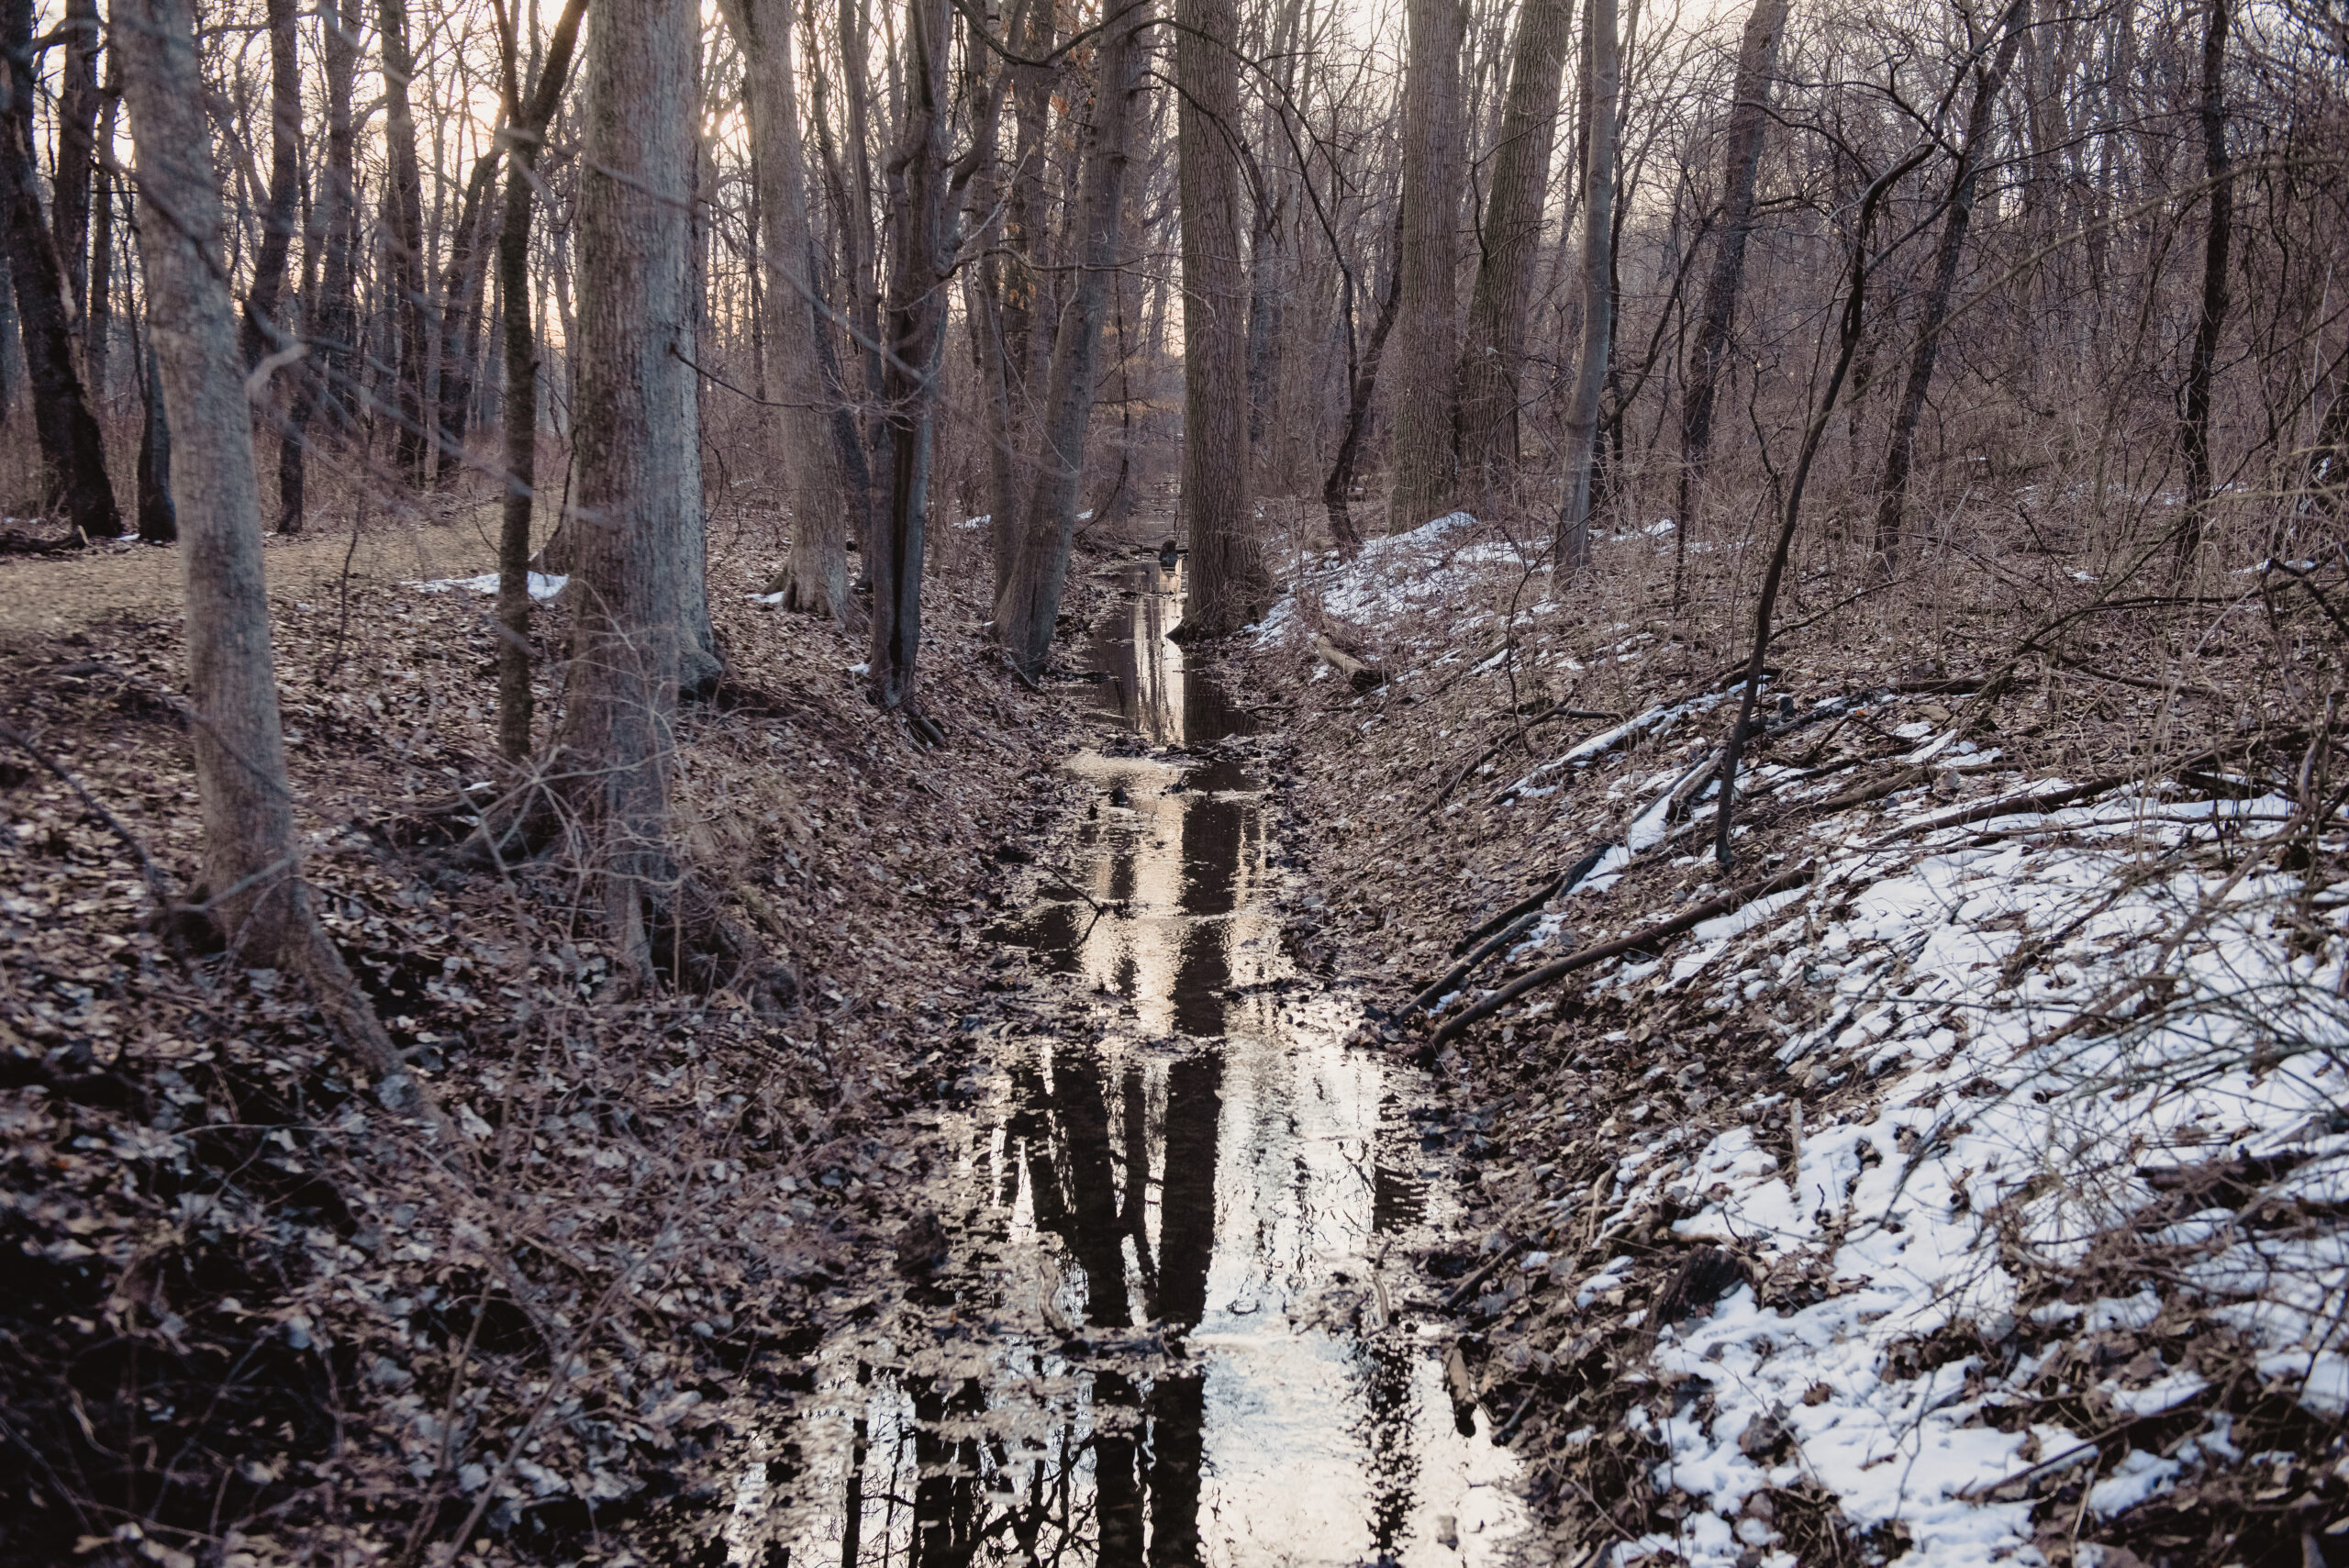 Ojibway National Urban Park: A stream of waterway in the park.